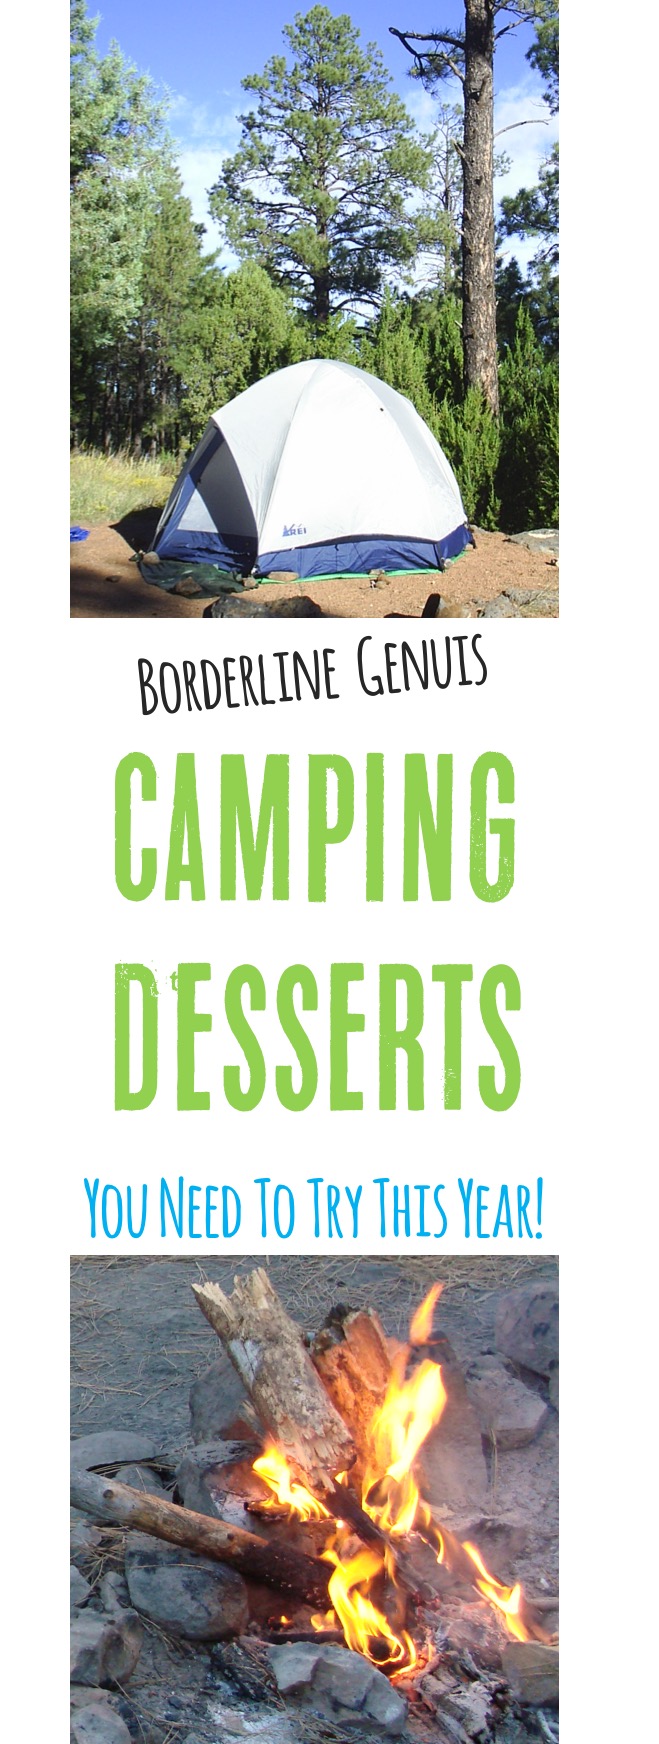 Camping Desserts from TheFrugalGirls.com